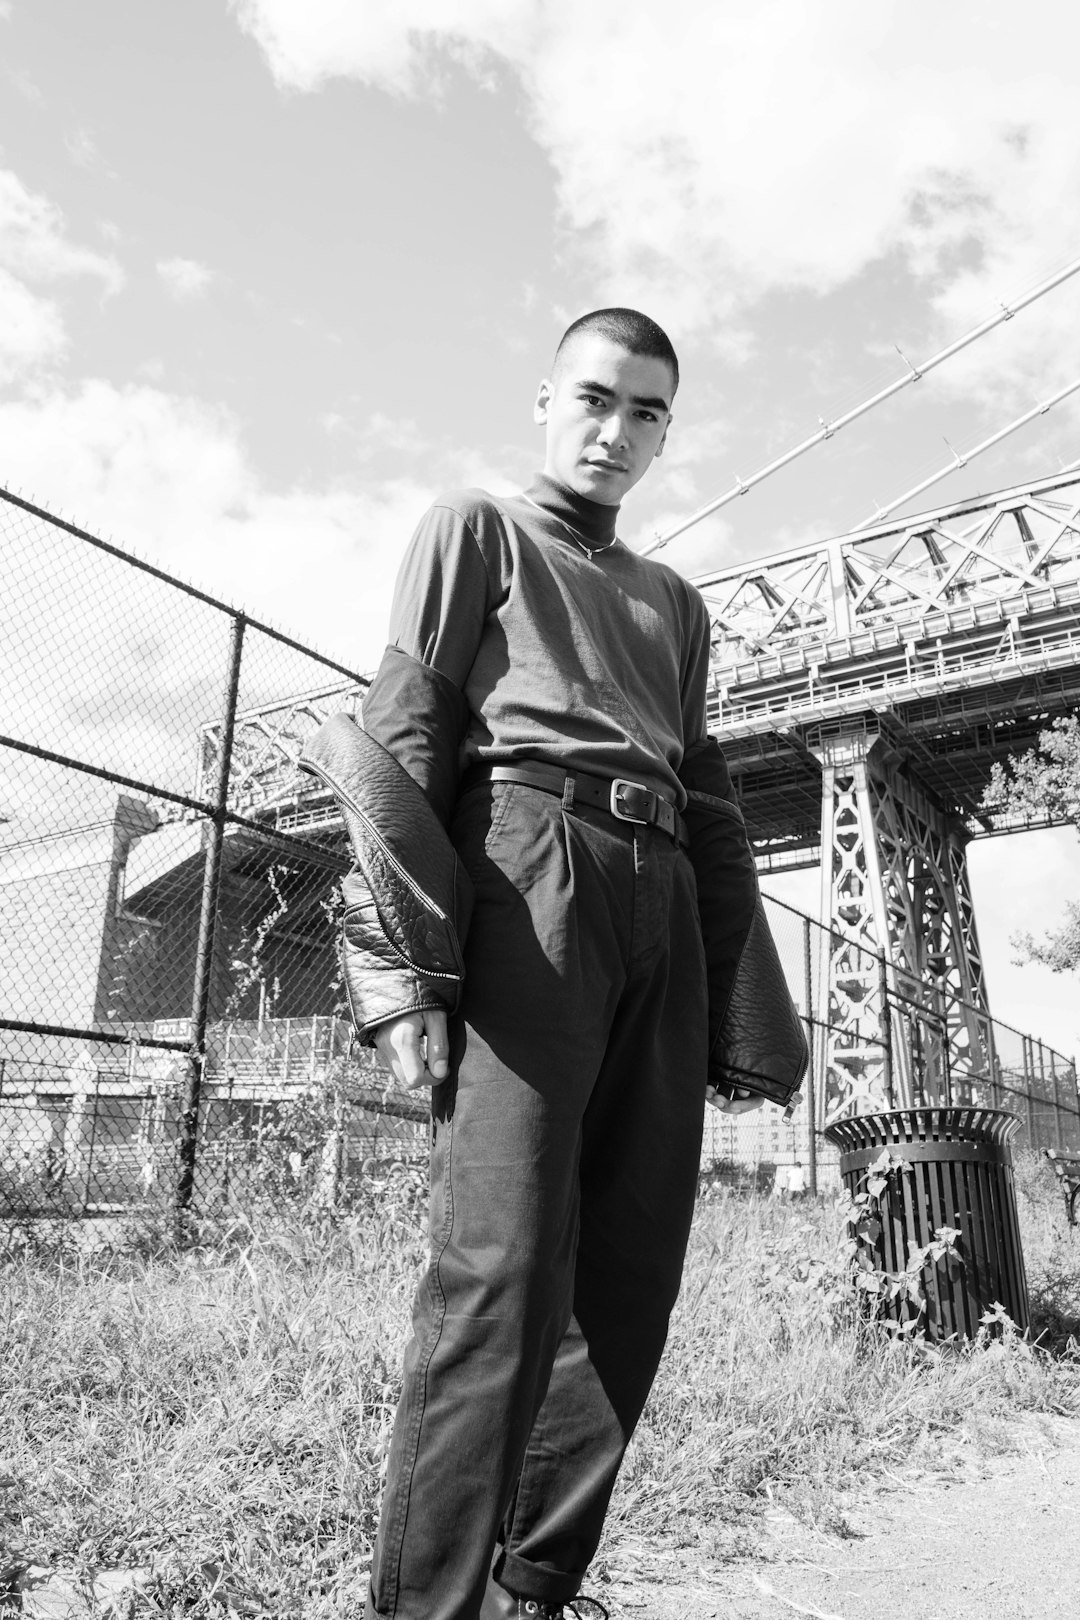 grayscale photo of man in jacket and pants standing near metal fence